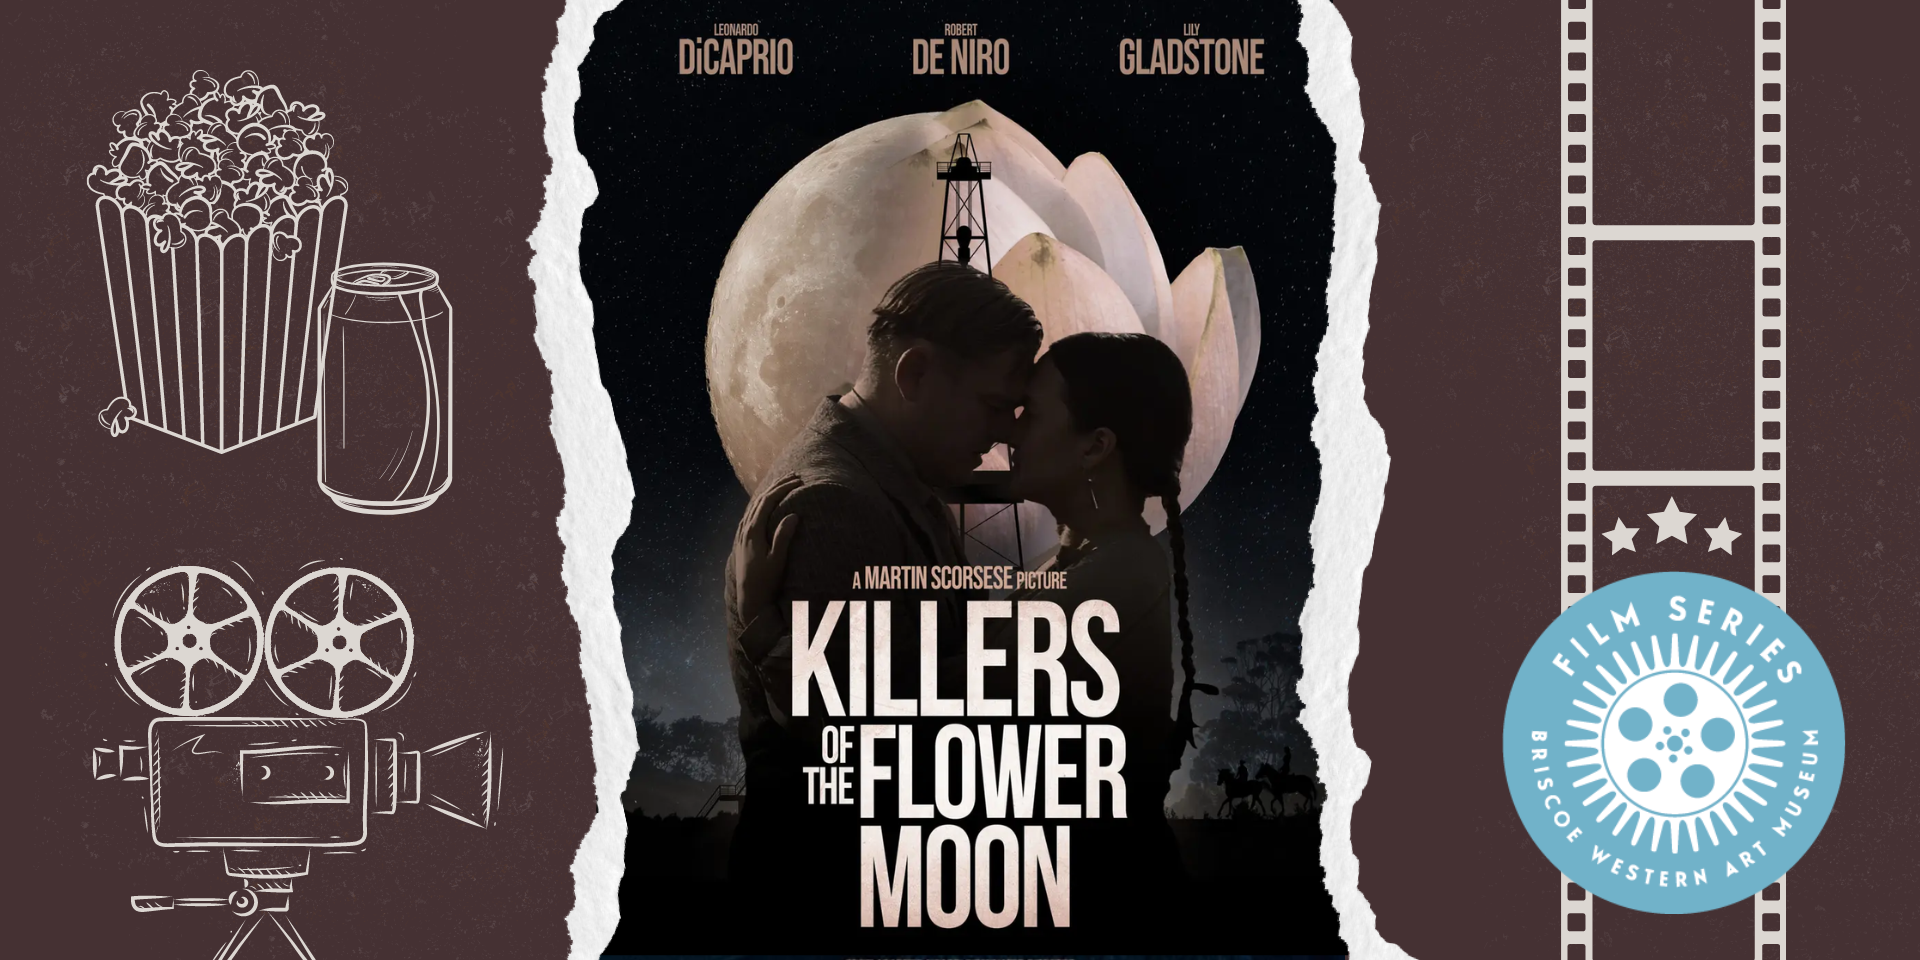 Summer Film Series - Killers of the Flower Moon Event Photo